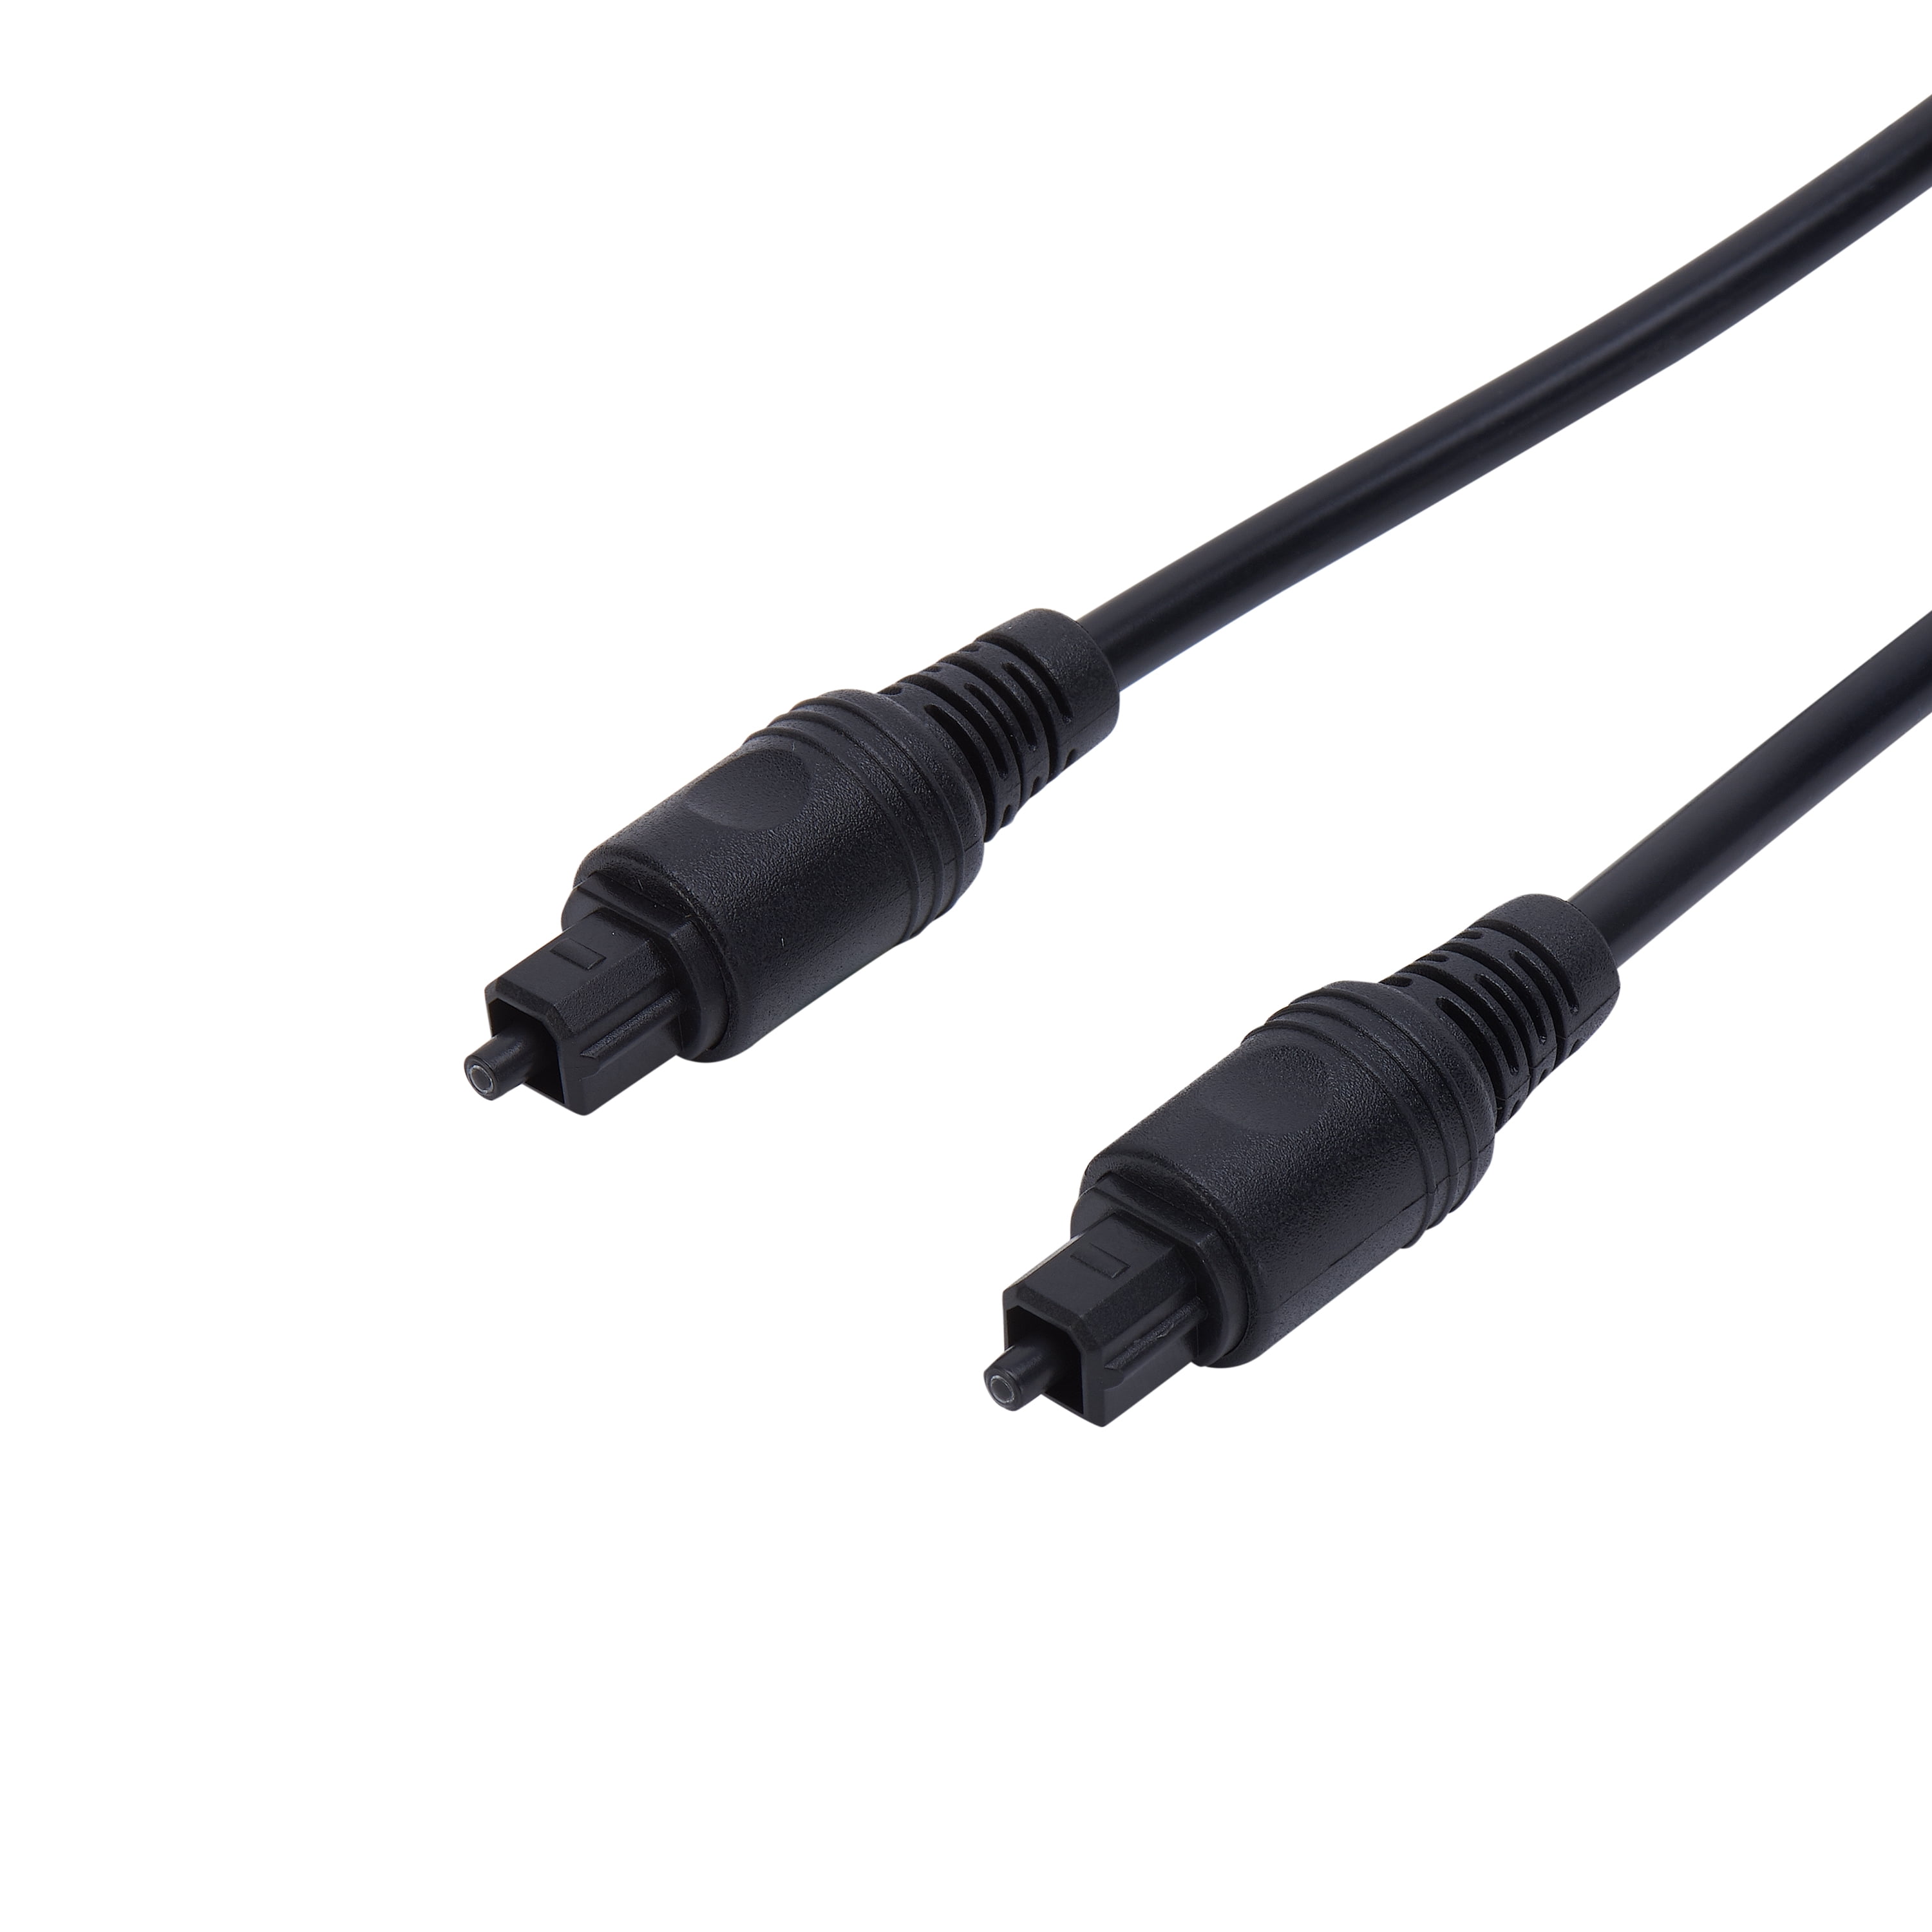 optical speaker cable - OFF-57% > Shipping free